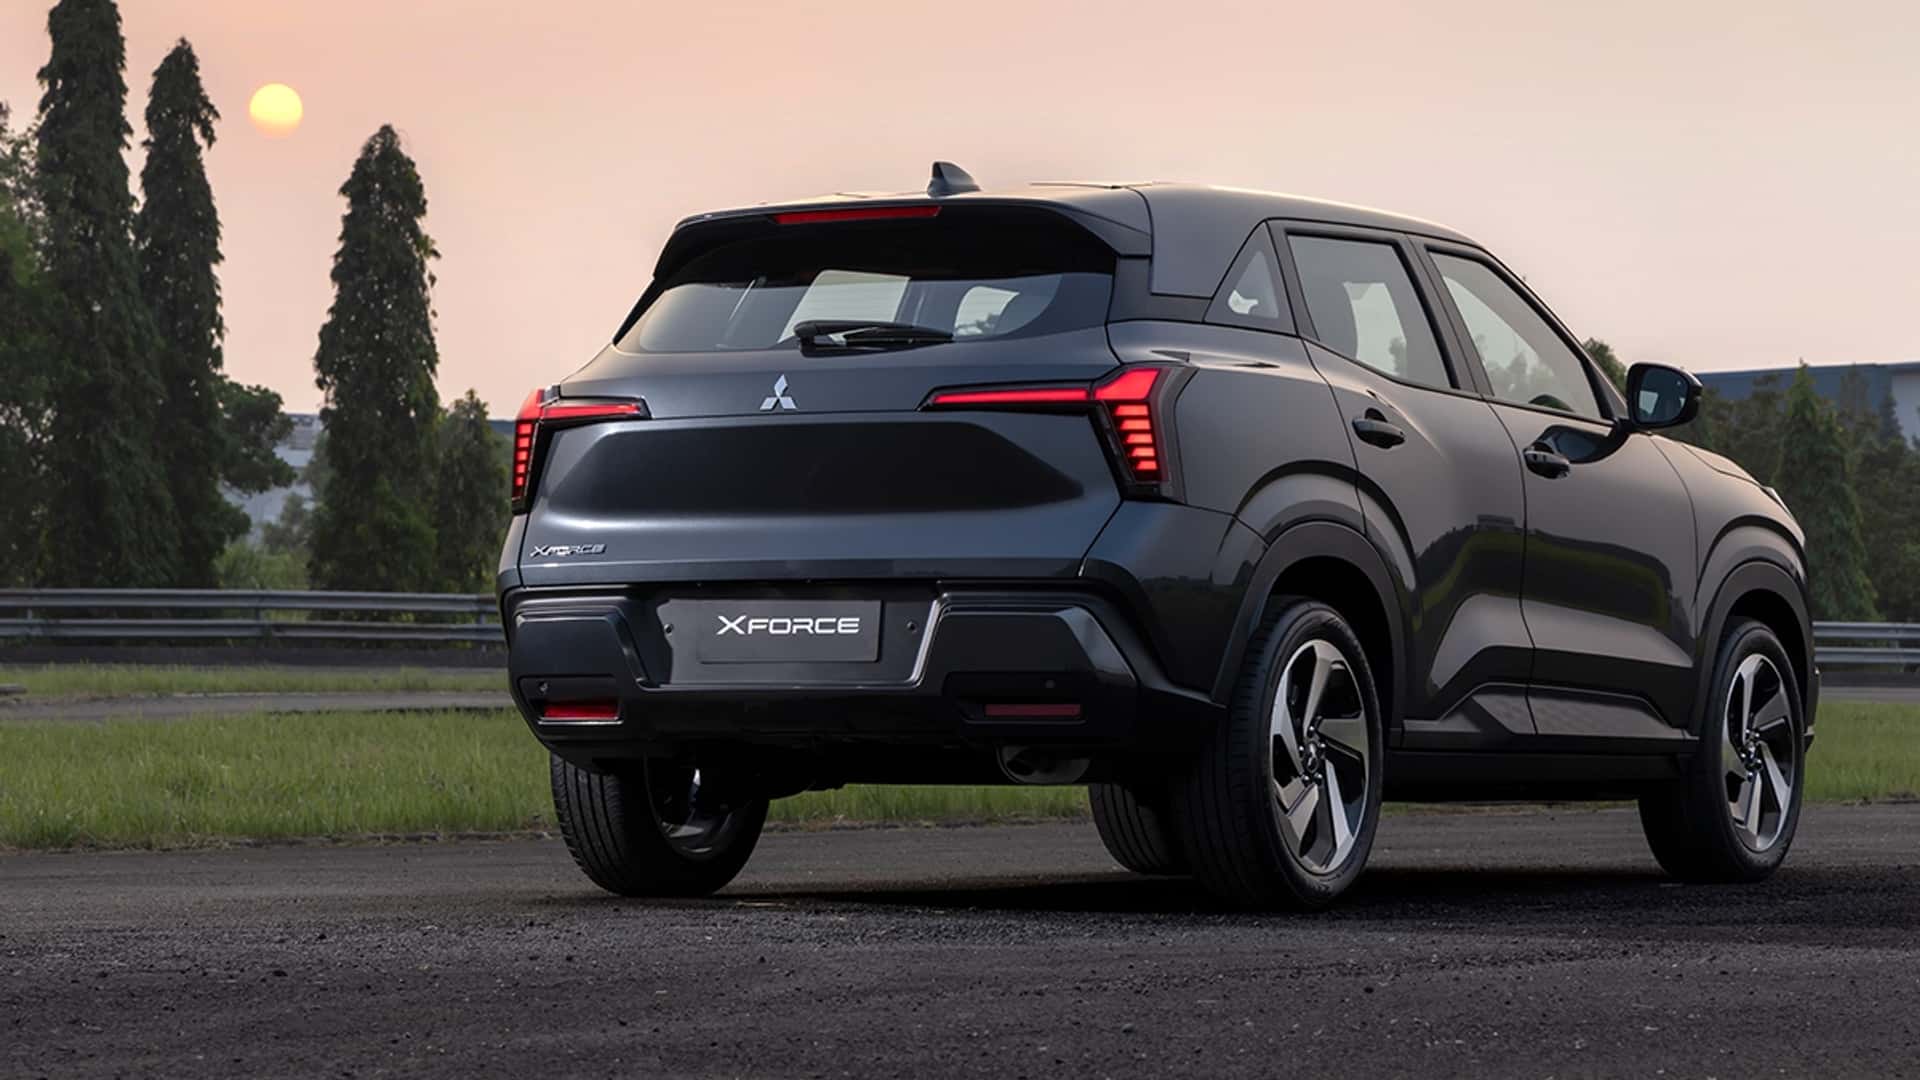 Mitsubishi Xforce will be equipped with additional advanced safety features in the future Mitsubishi Xforce 2024, with an estimated price of 600 million VND in Vietnam, will be very hot mitsubishi-xforce-2023-1.jpg